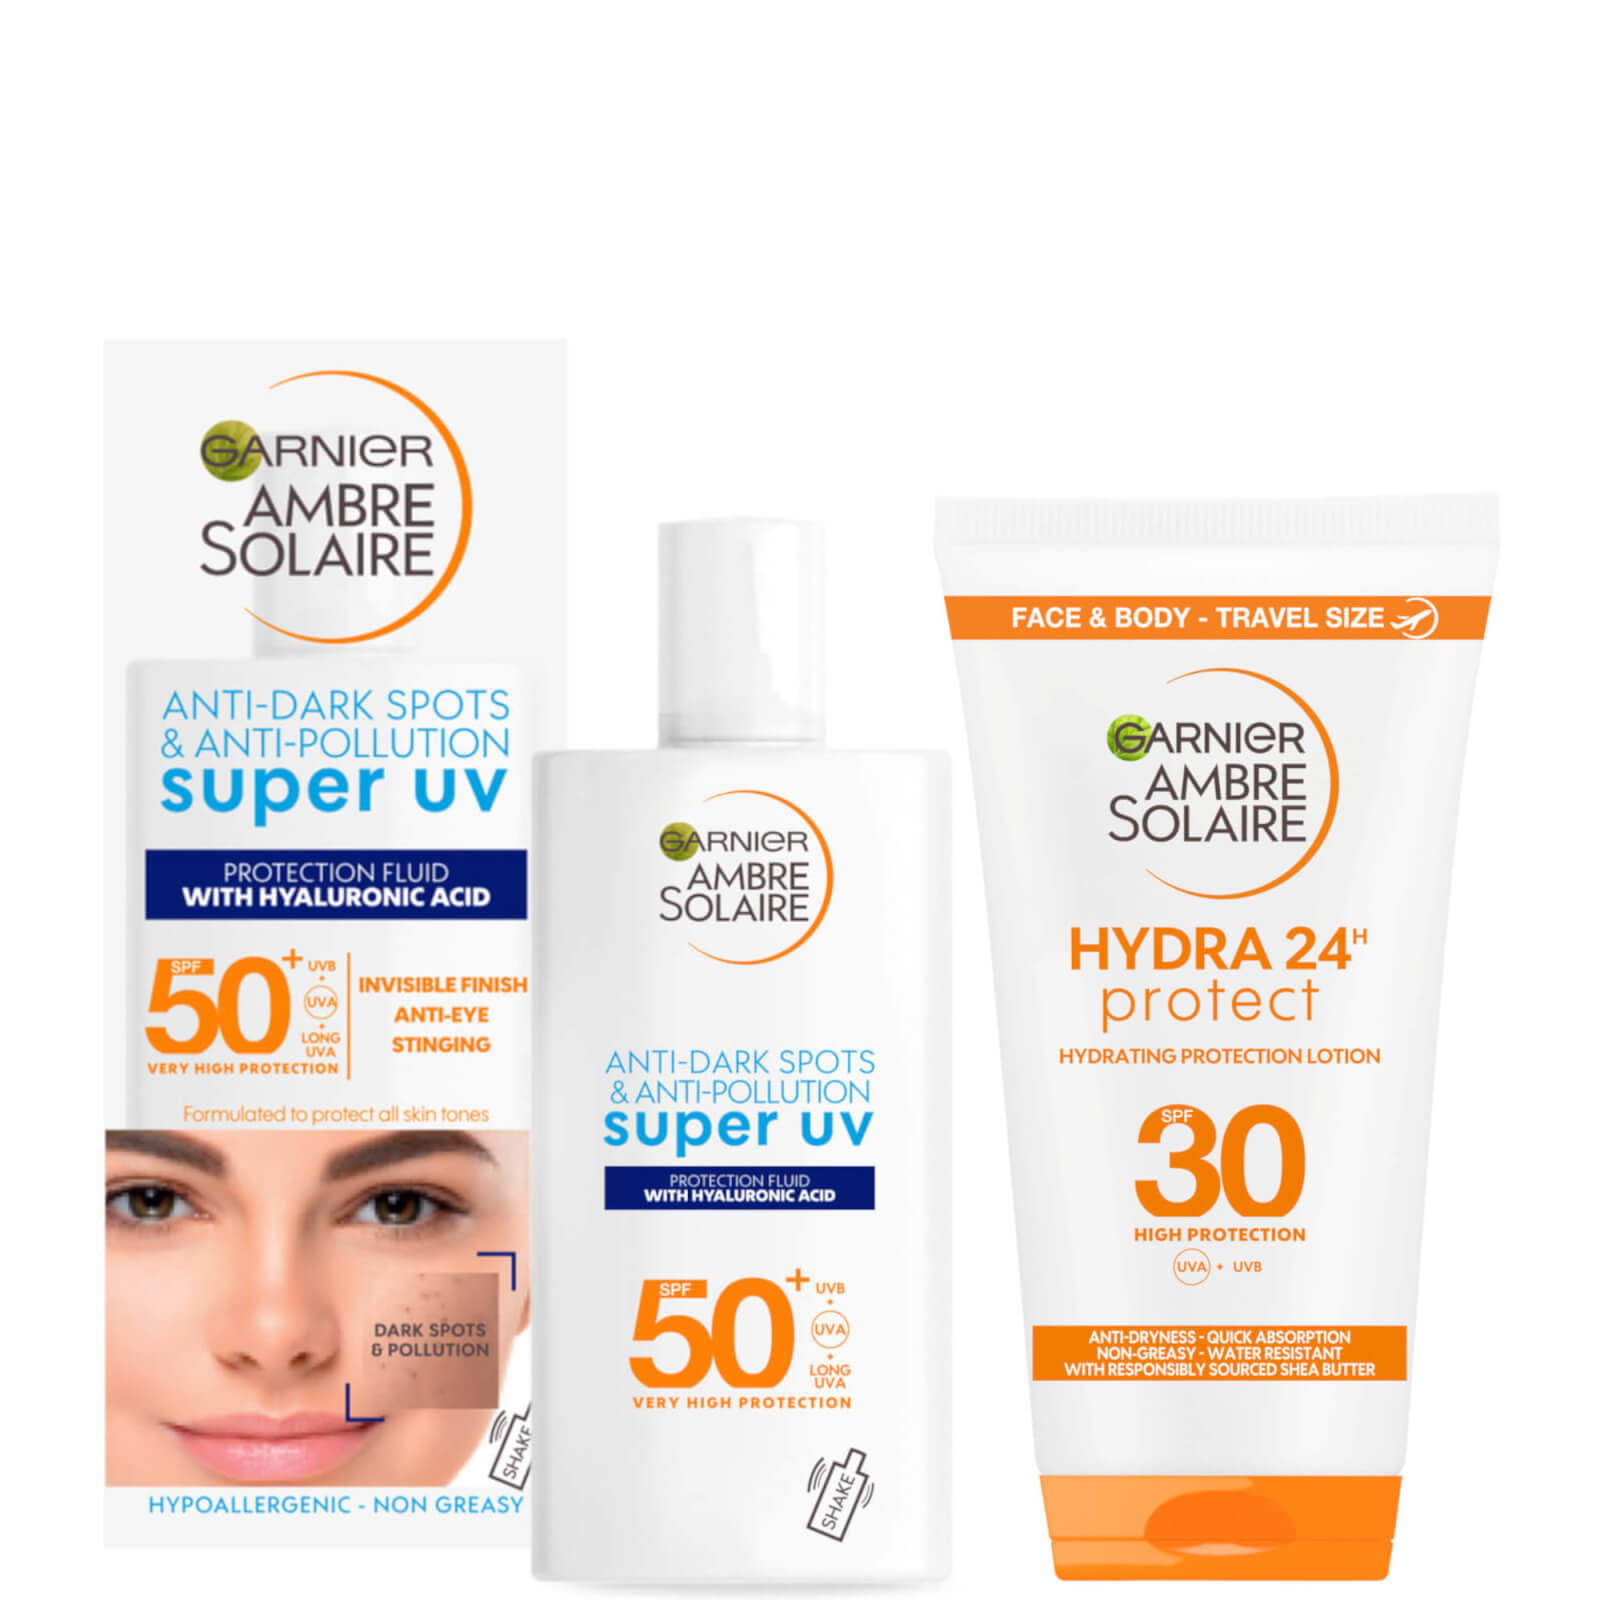 Image of Garnier Ambre Solaire Sun Cream Travel Size Starter Kit for Face and Body